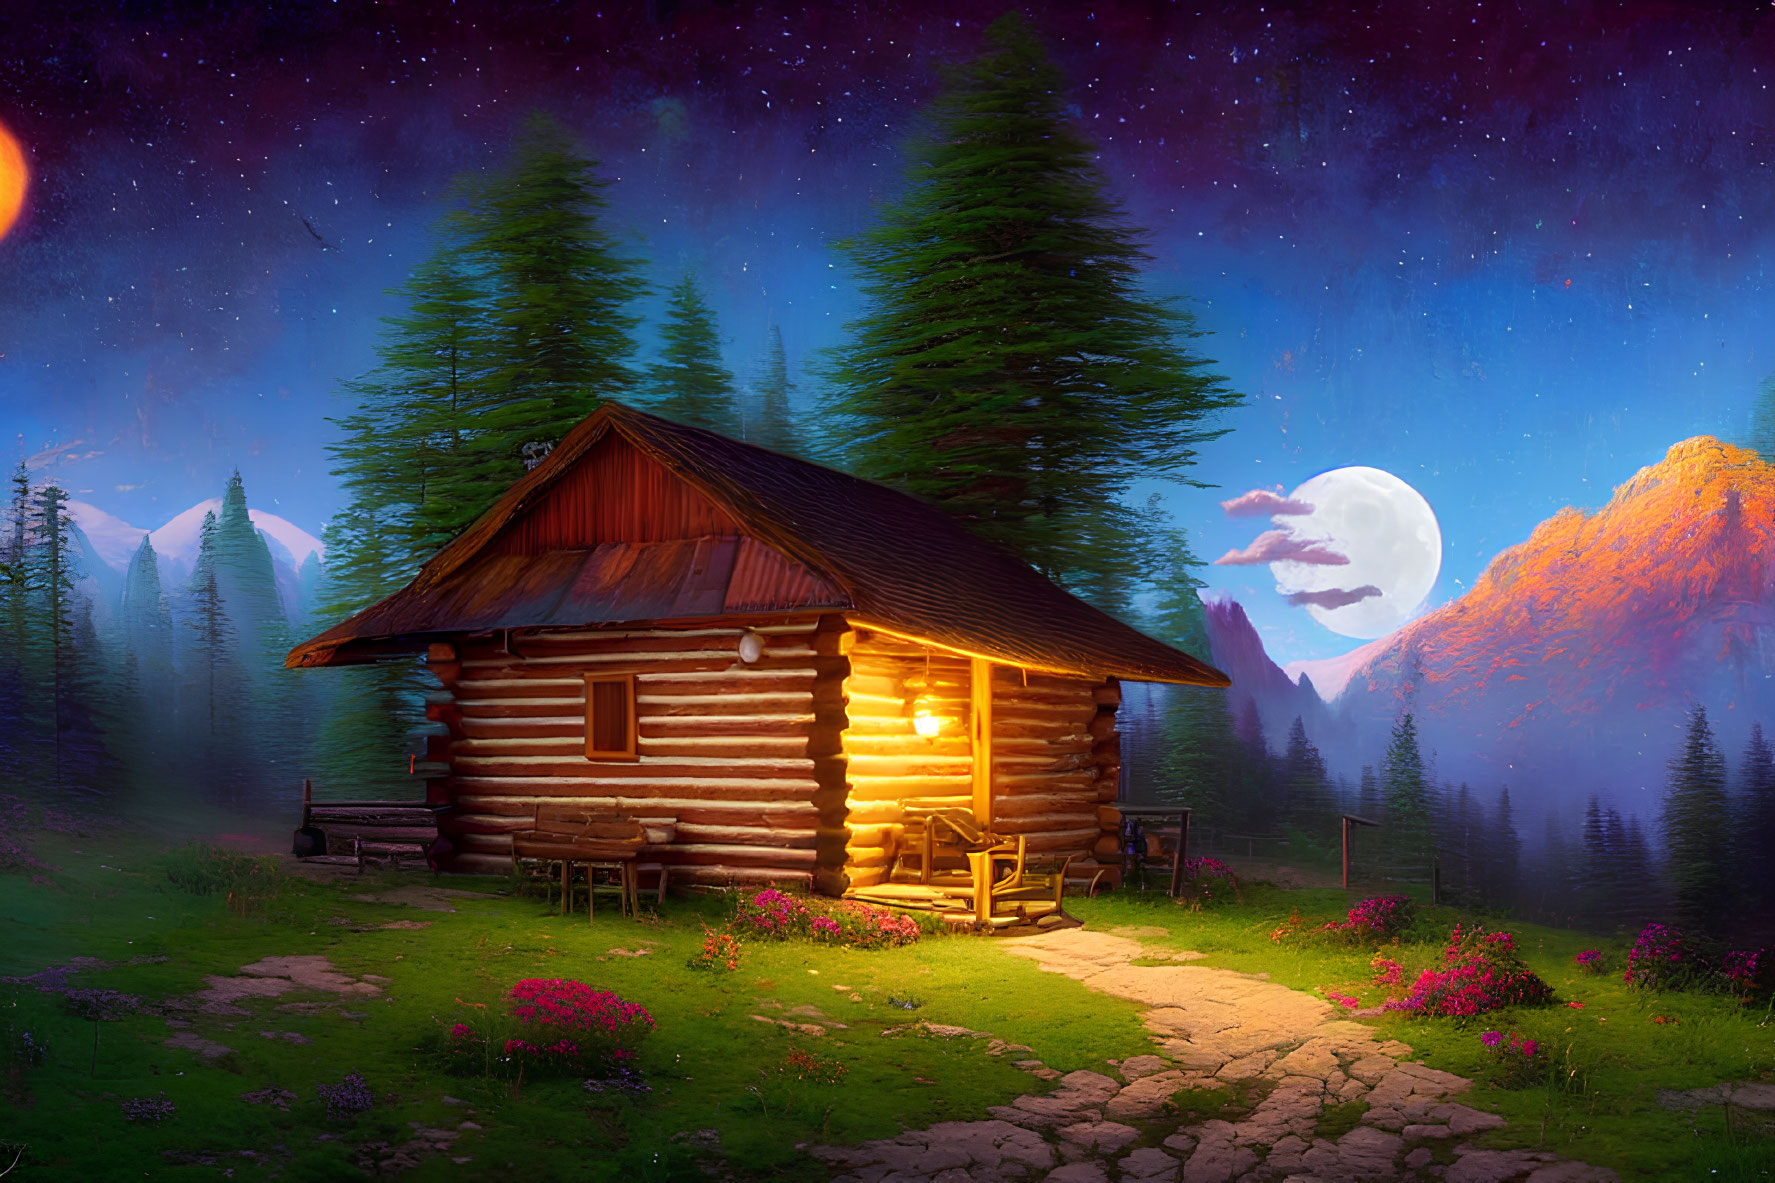 Serene forest clearing: Cozy log cabin under starry sky